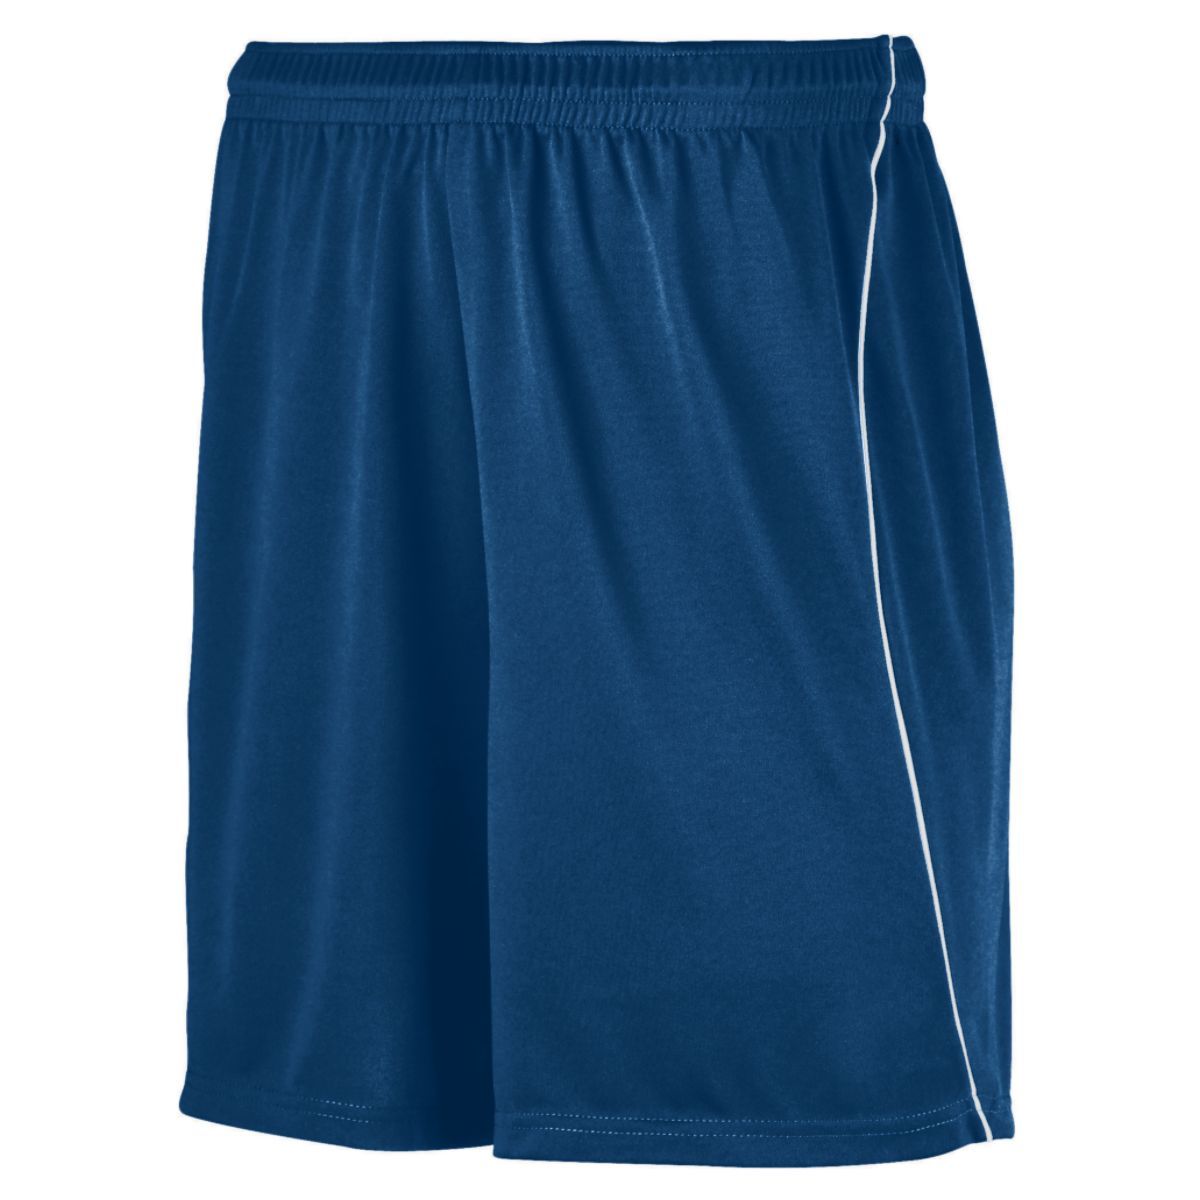 Augusta Sportswear Youth Wicking Soccer Shorts With Piping in Navy/White  -Part of the Youth, Youth-Shorts, Augusta-Products, Soccer, All-Sports-1 product lines at KanaleyCreations.com